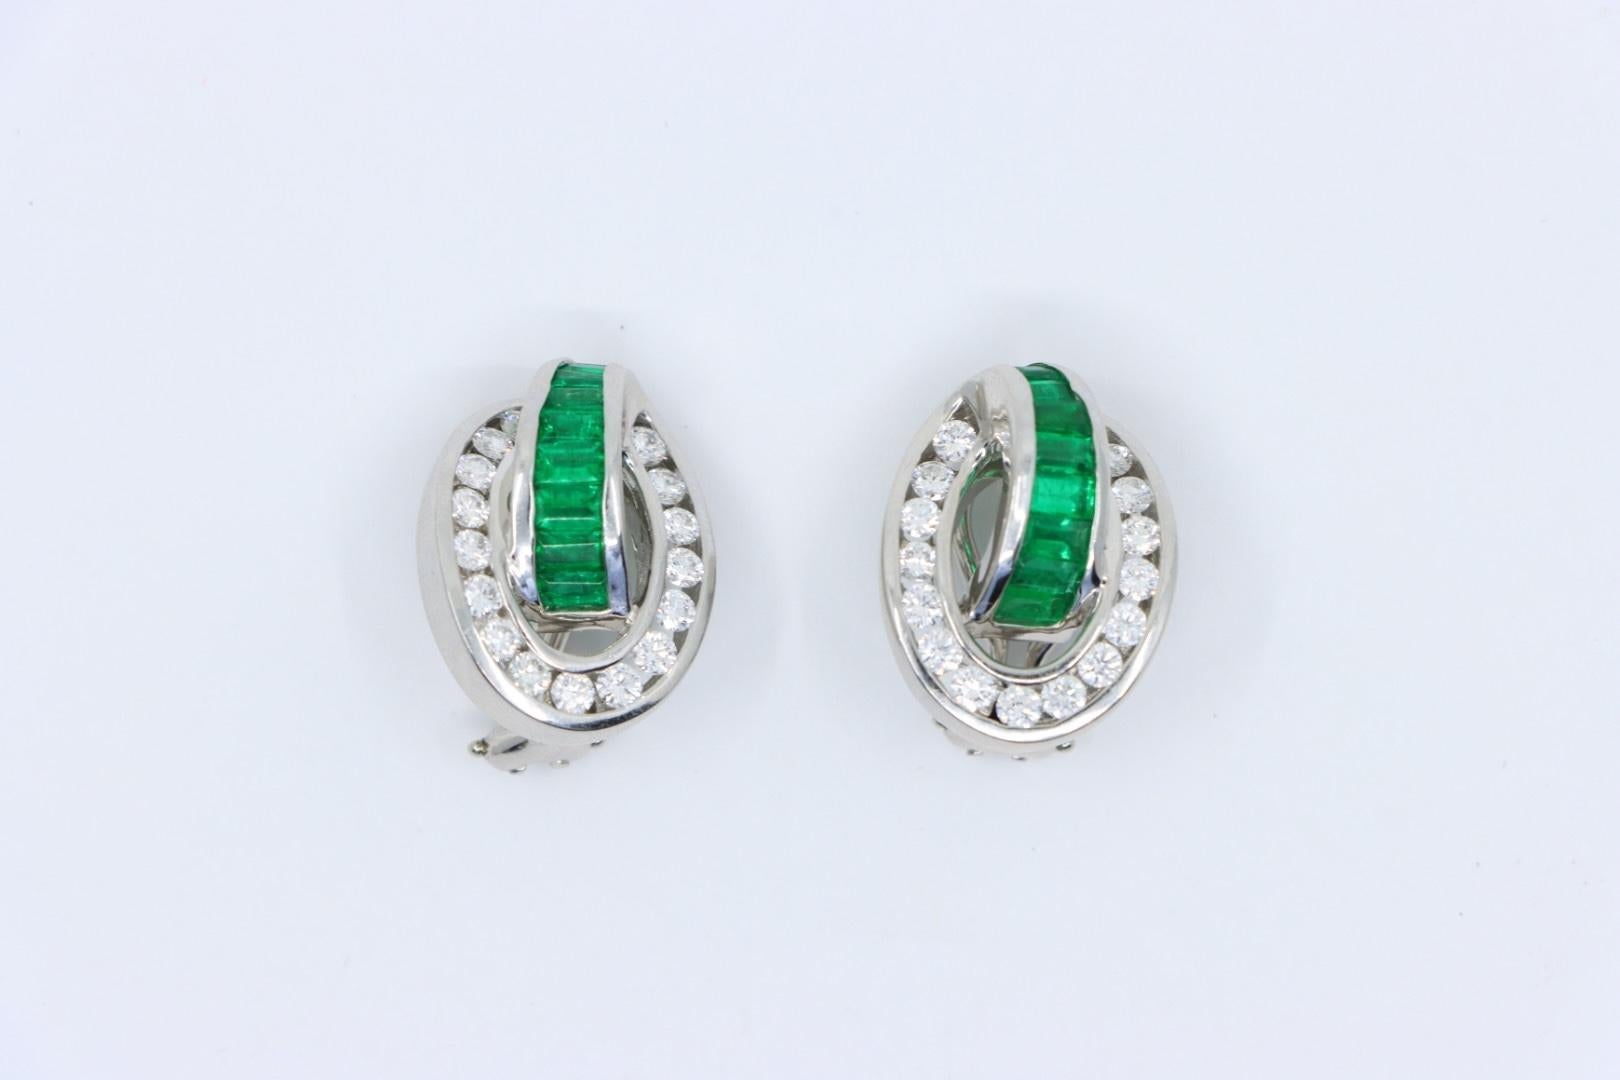 Charles Krypell Platinum Diamonds Emerald Earrings In Good Condition For Sale In Flushing, NY